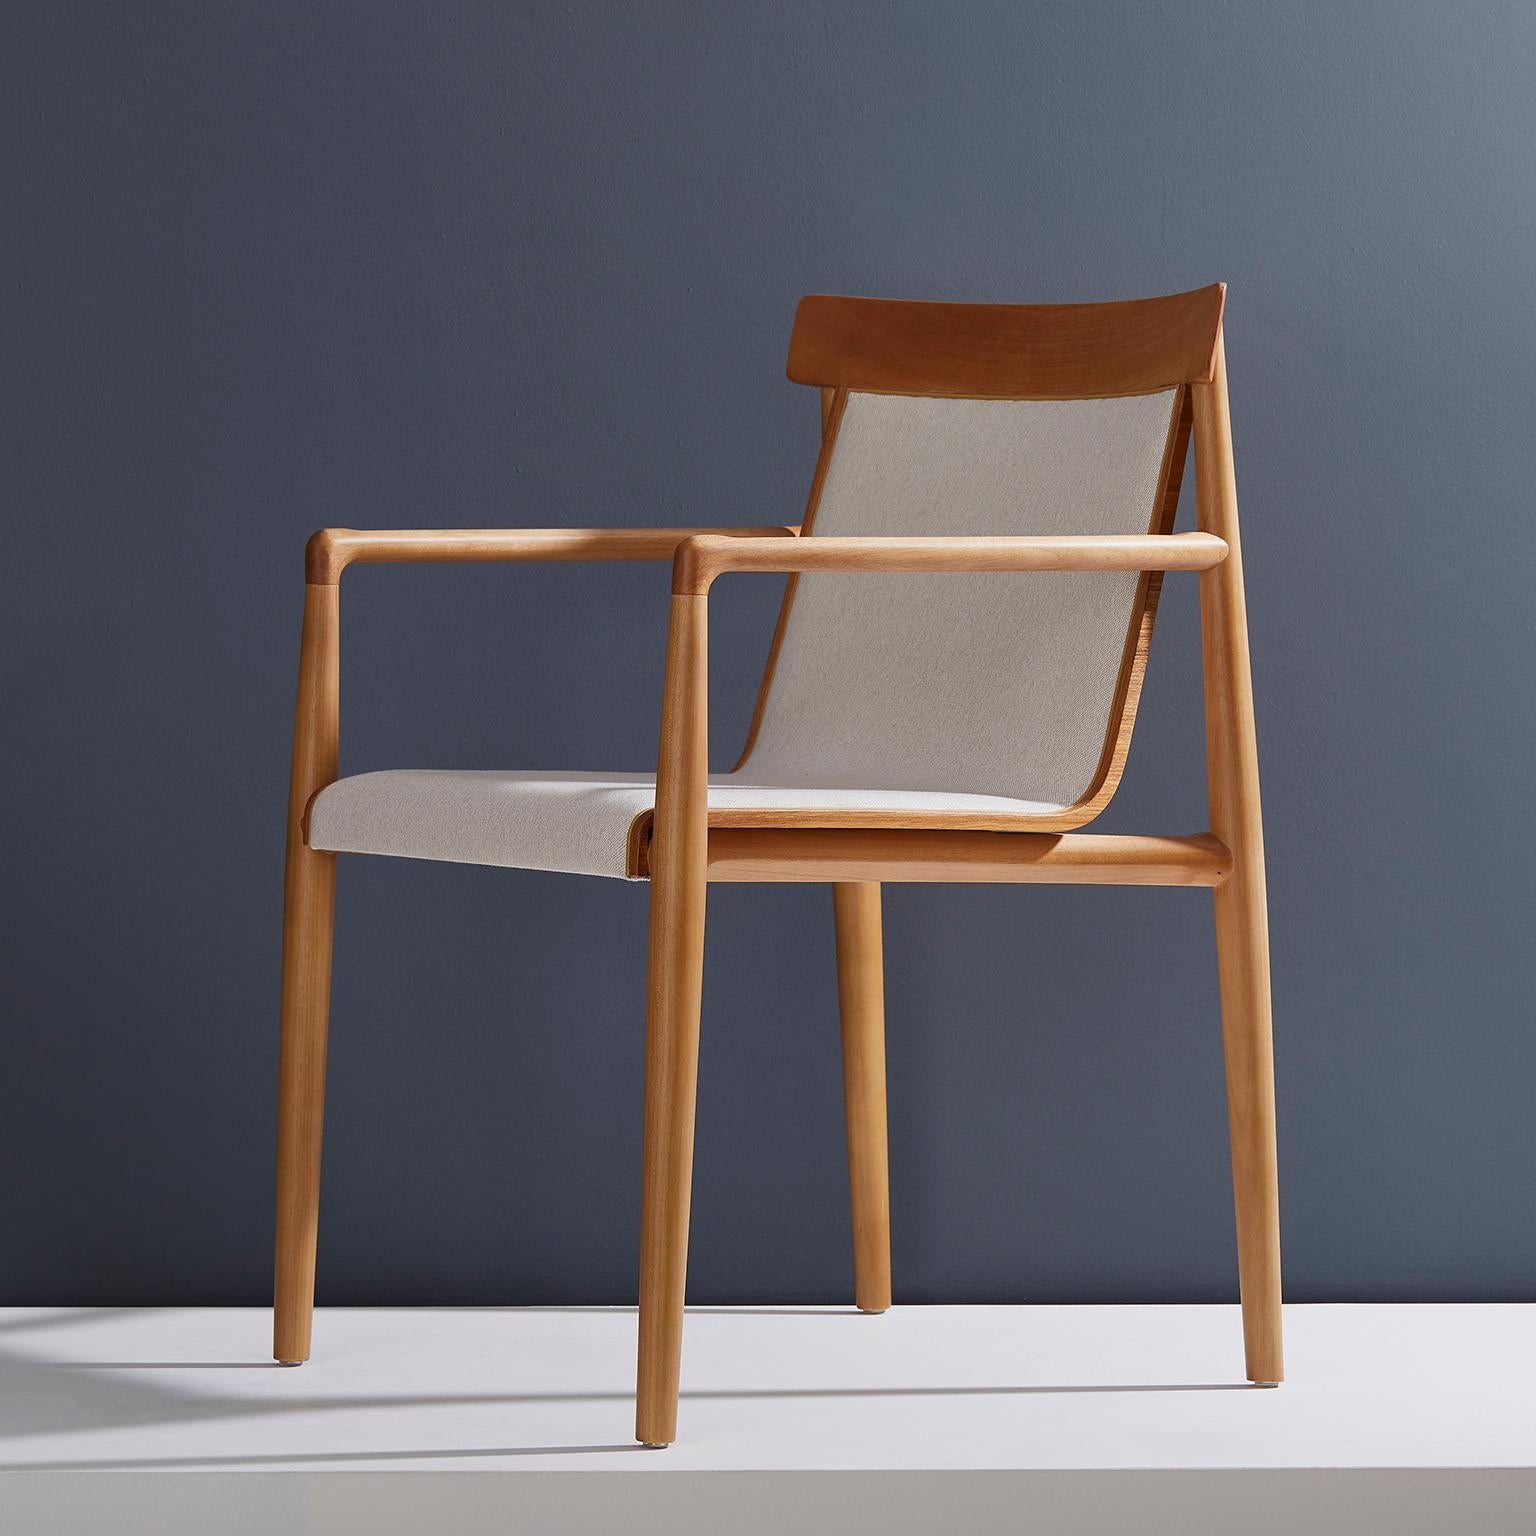 Dry chair collection.

The dry chair concept is to work in a mixture of distinct references resulting in a modern classic in a dance between the retro and the modern. A heavy and in depth wood work is put to the structure to create interesting